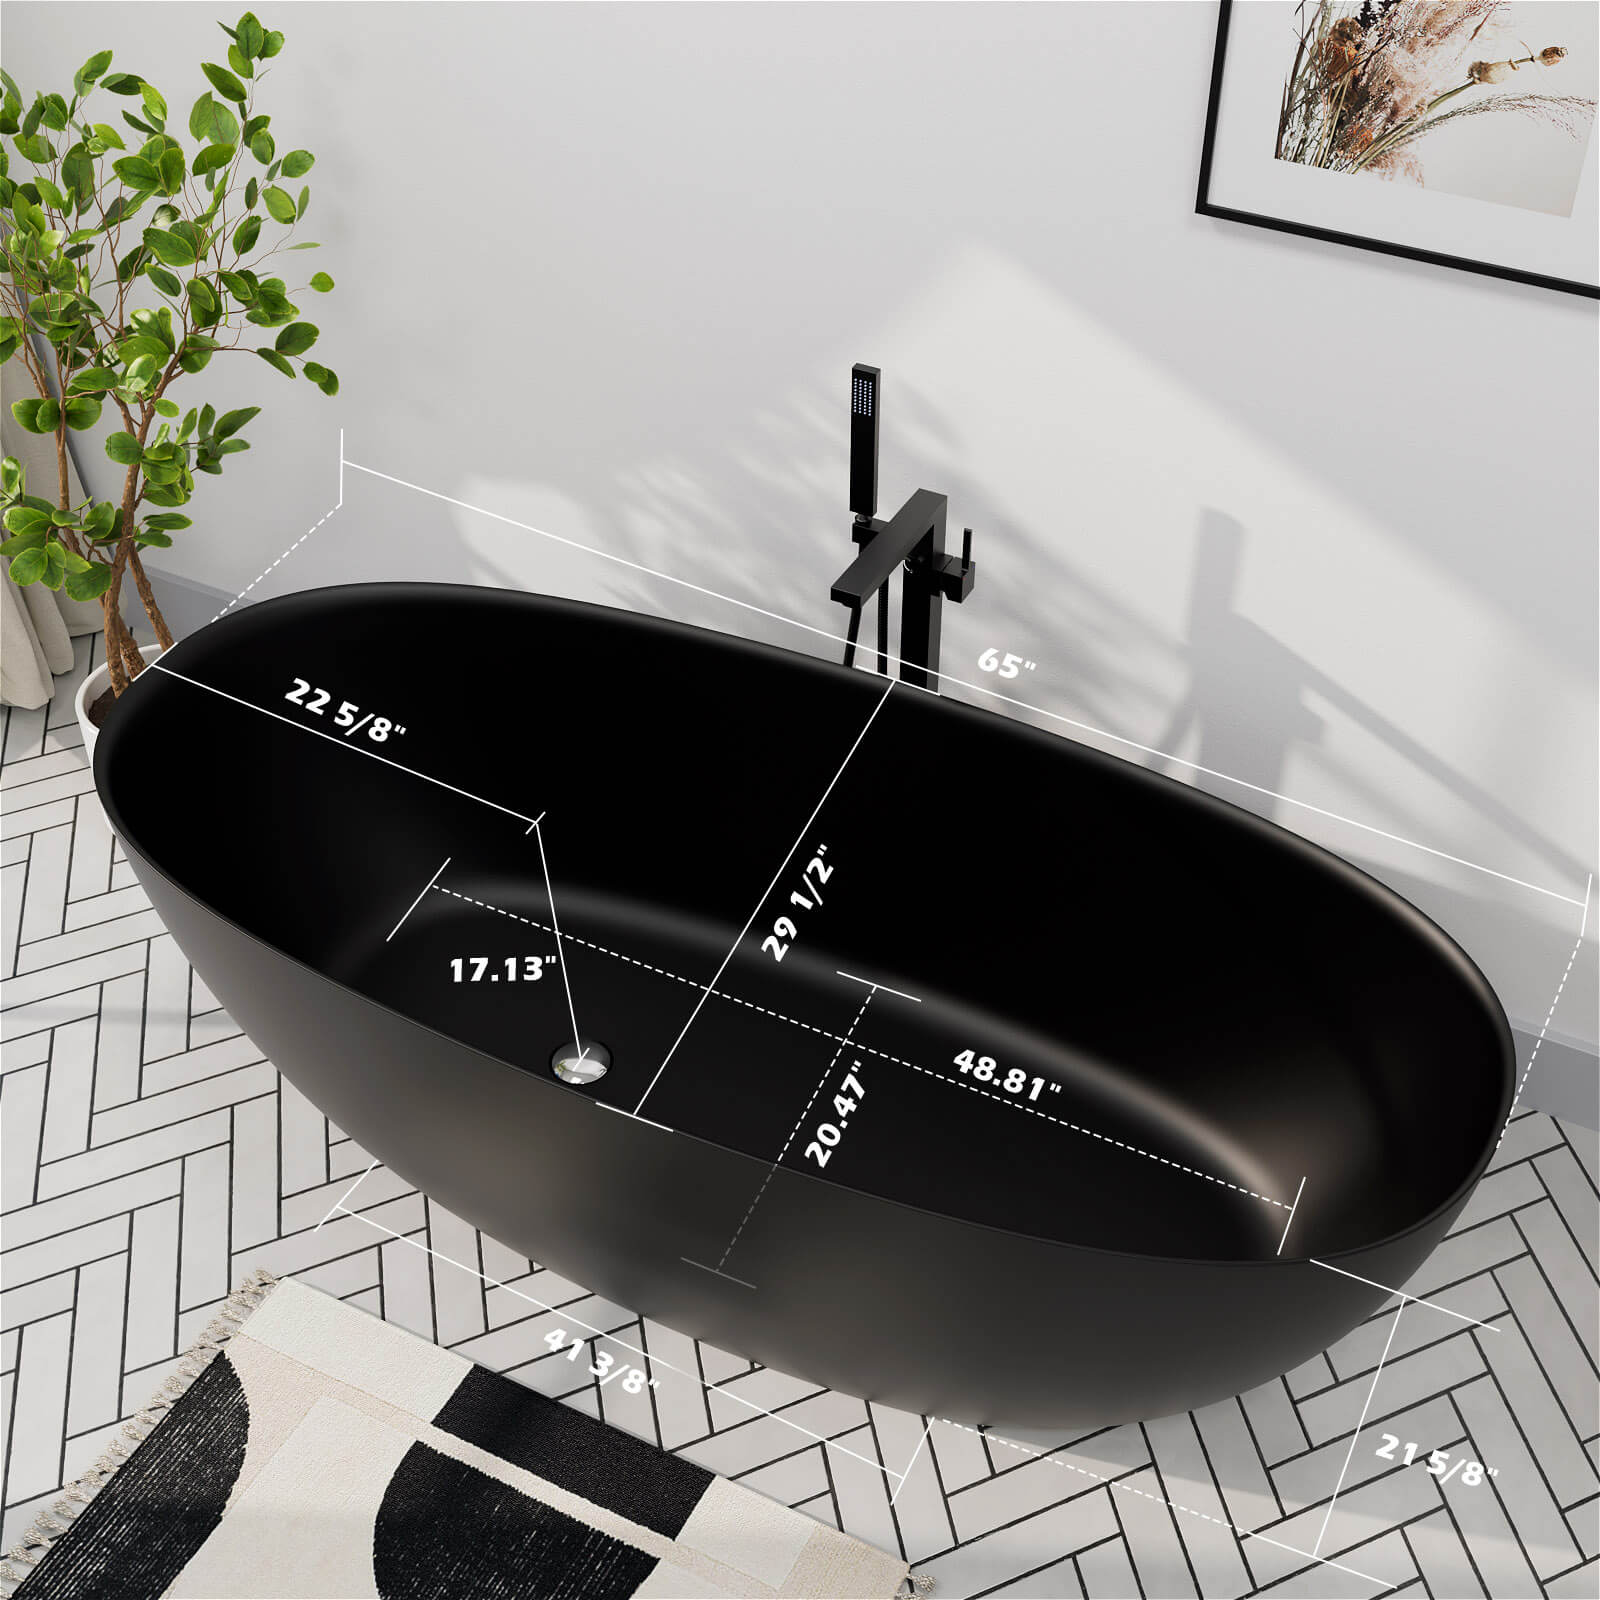 Modern Oval Freestanding Soaking Tub Dimensions Instructions